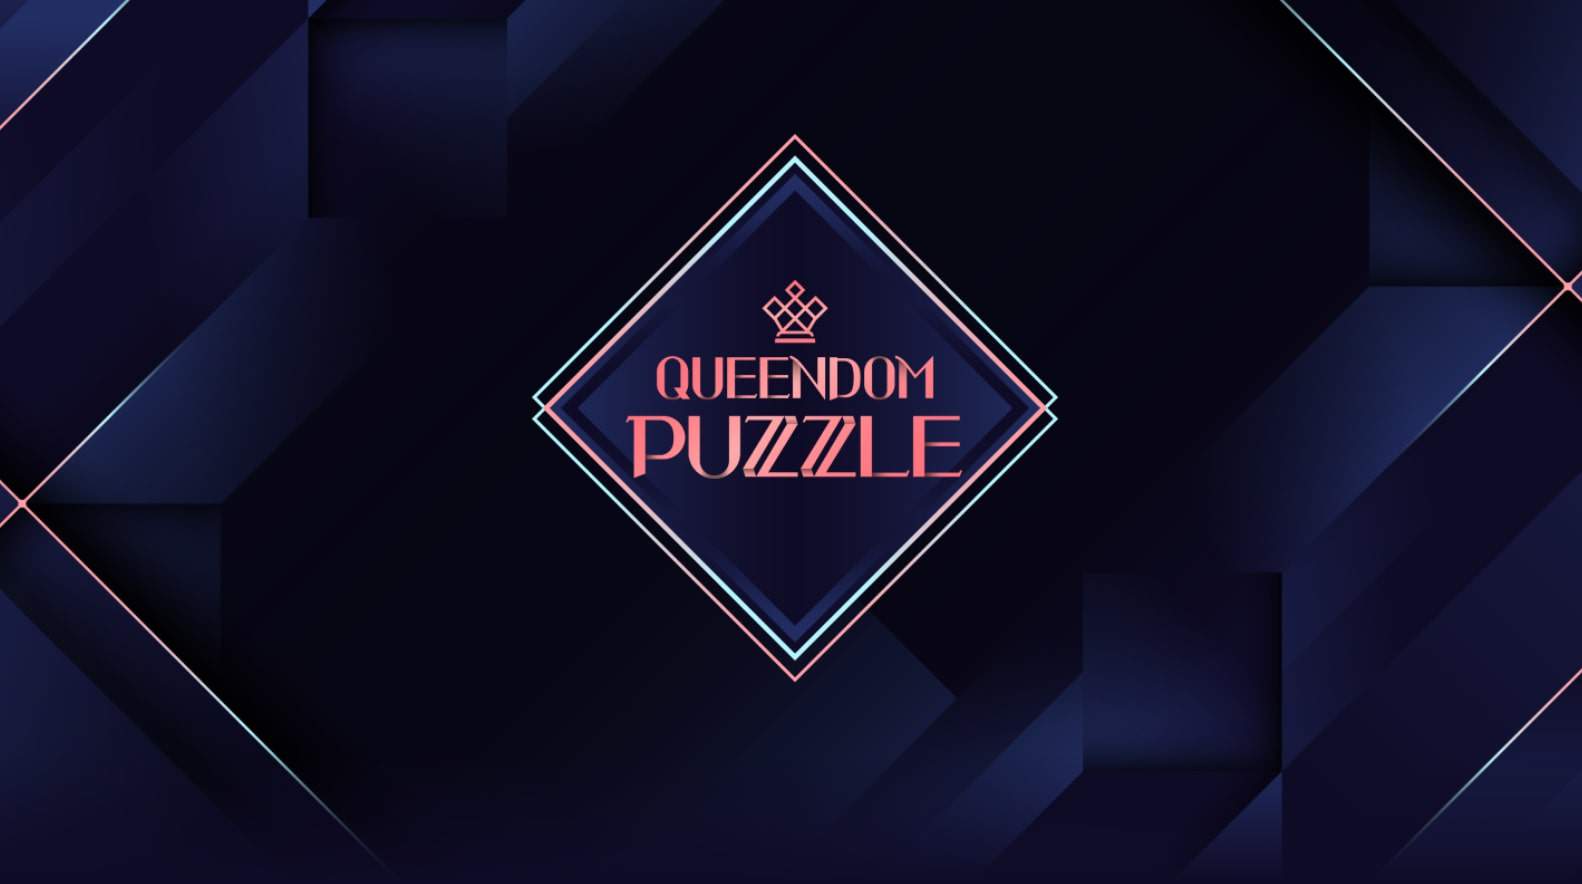 Queendom Puzzle Episode 2: Release Date, Preview & Streaming Guide